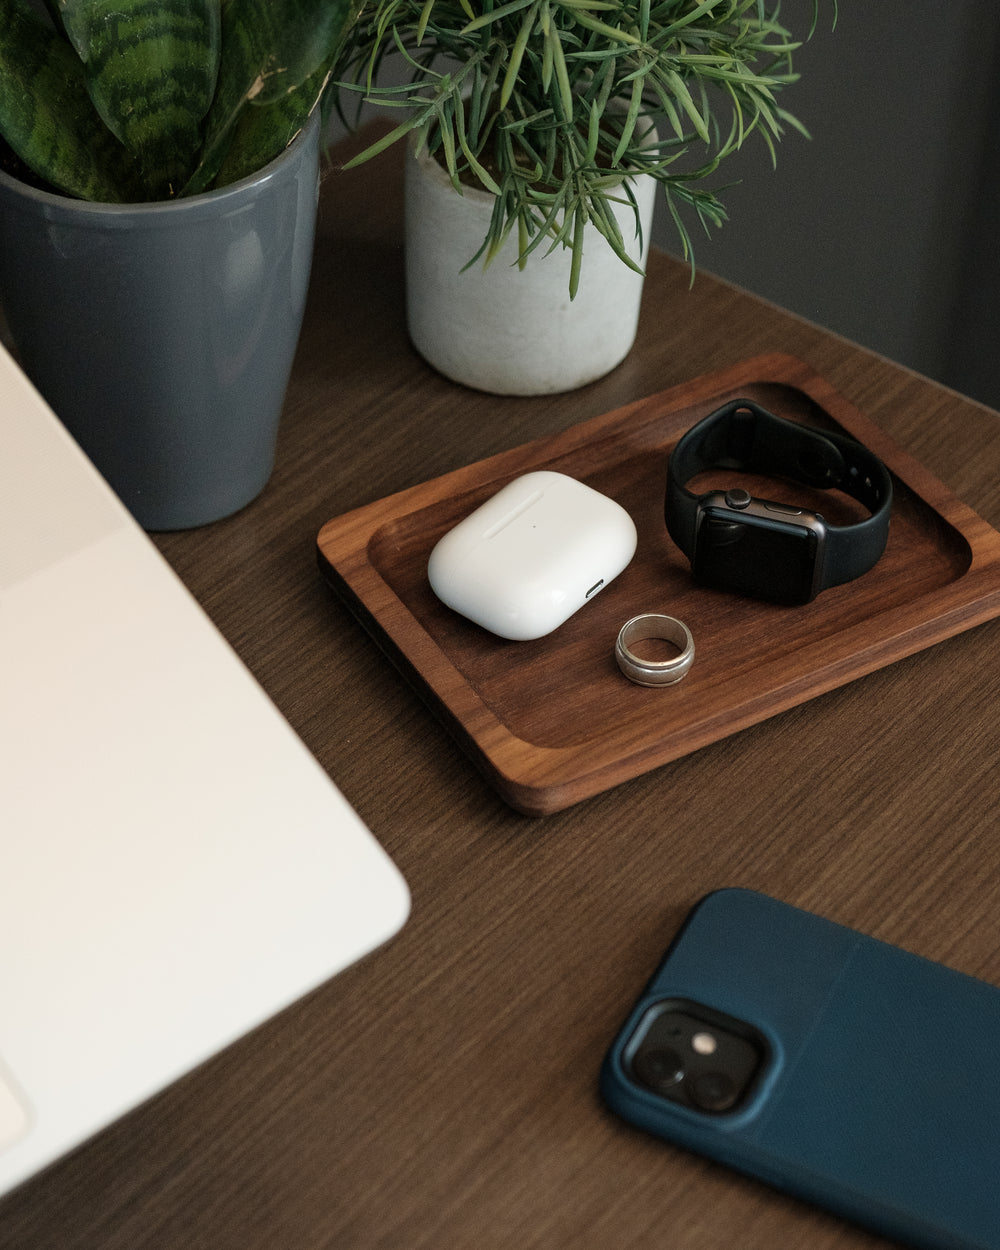 office flat lay on wooden desk with catch tray